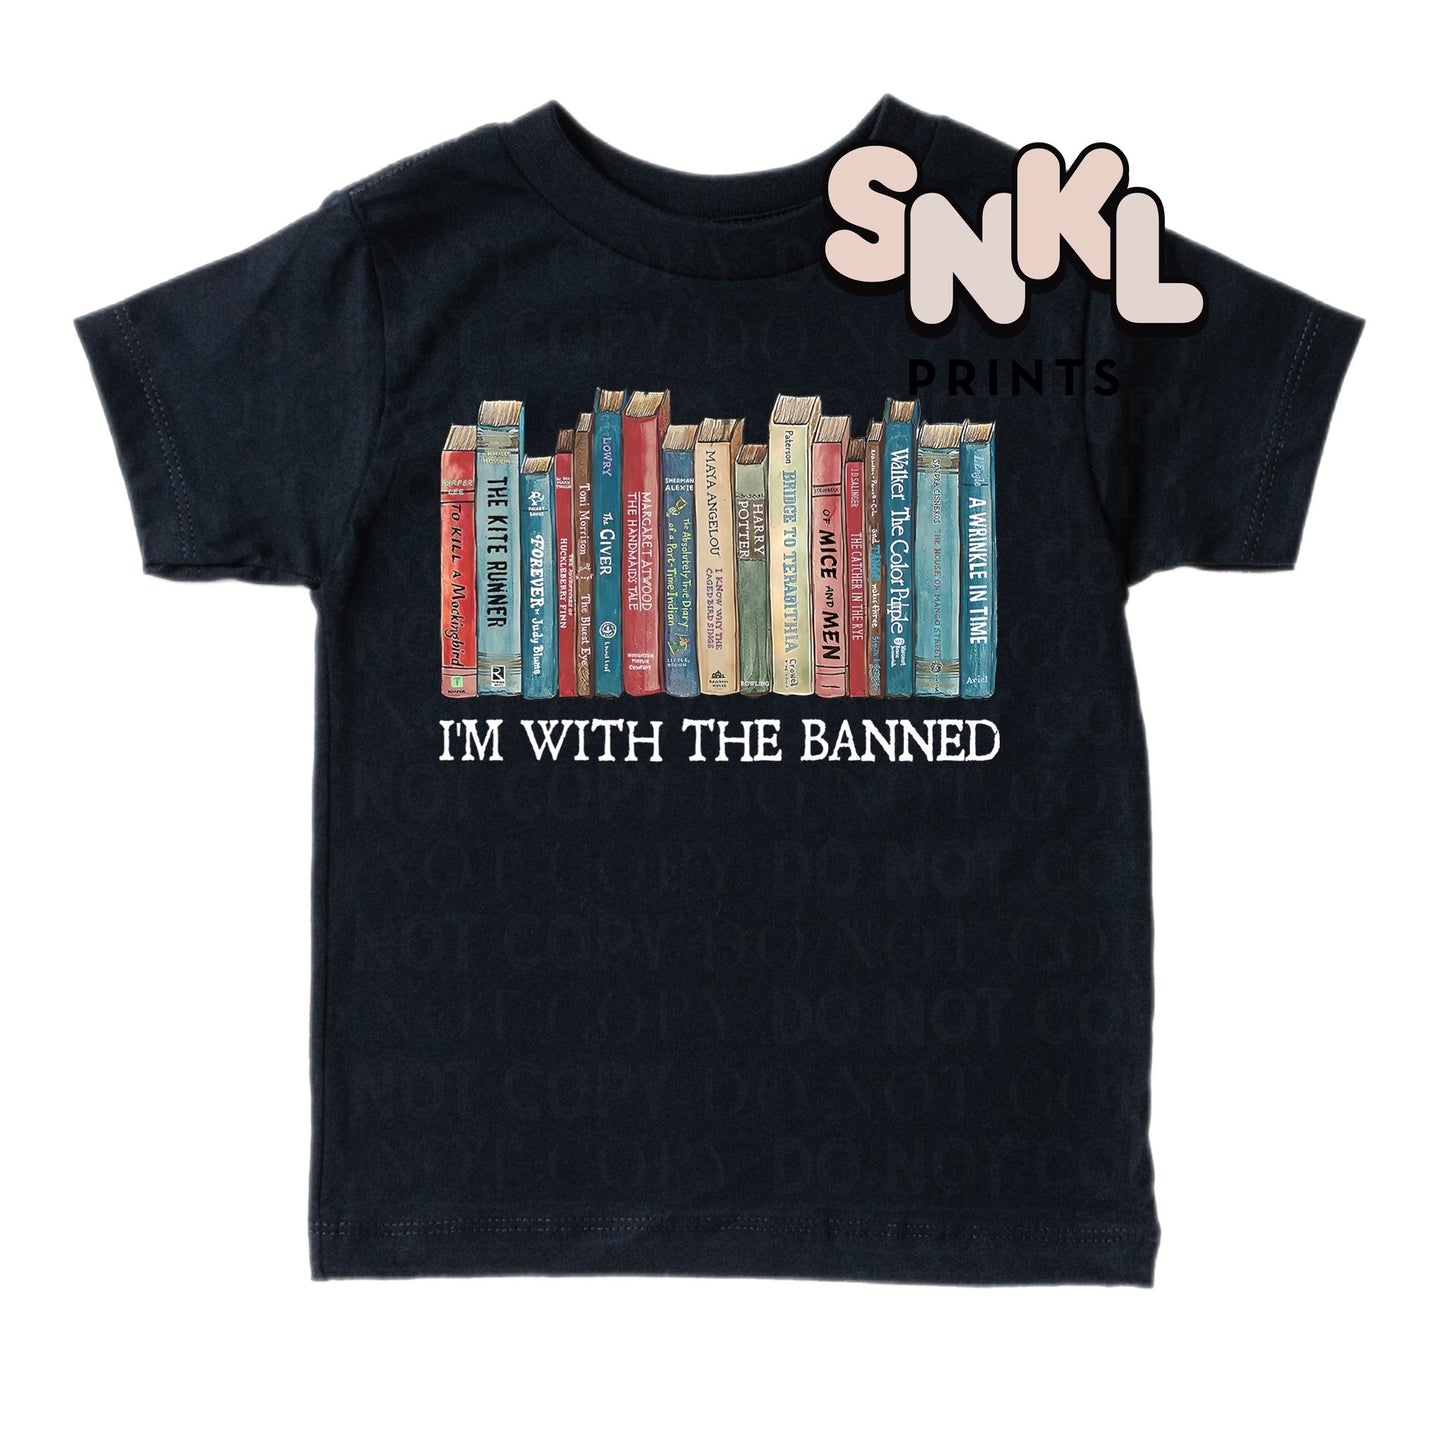 I'm With The Banned| Kids - SNKL Prints